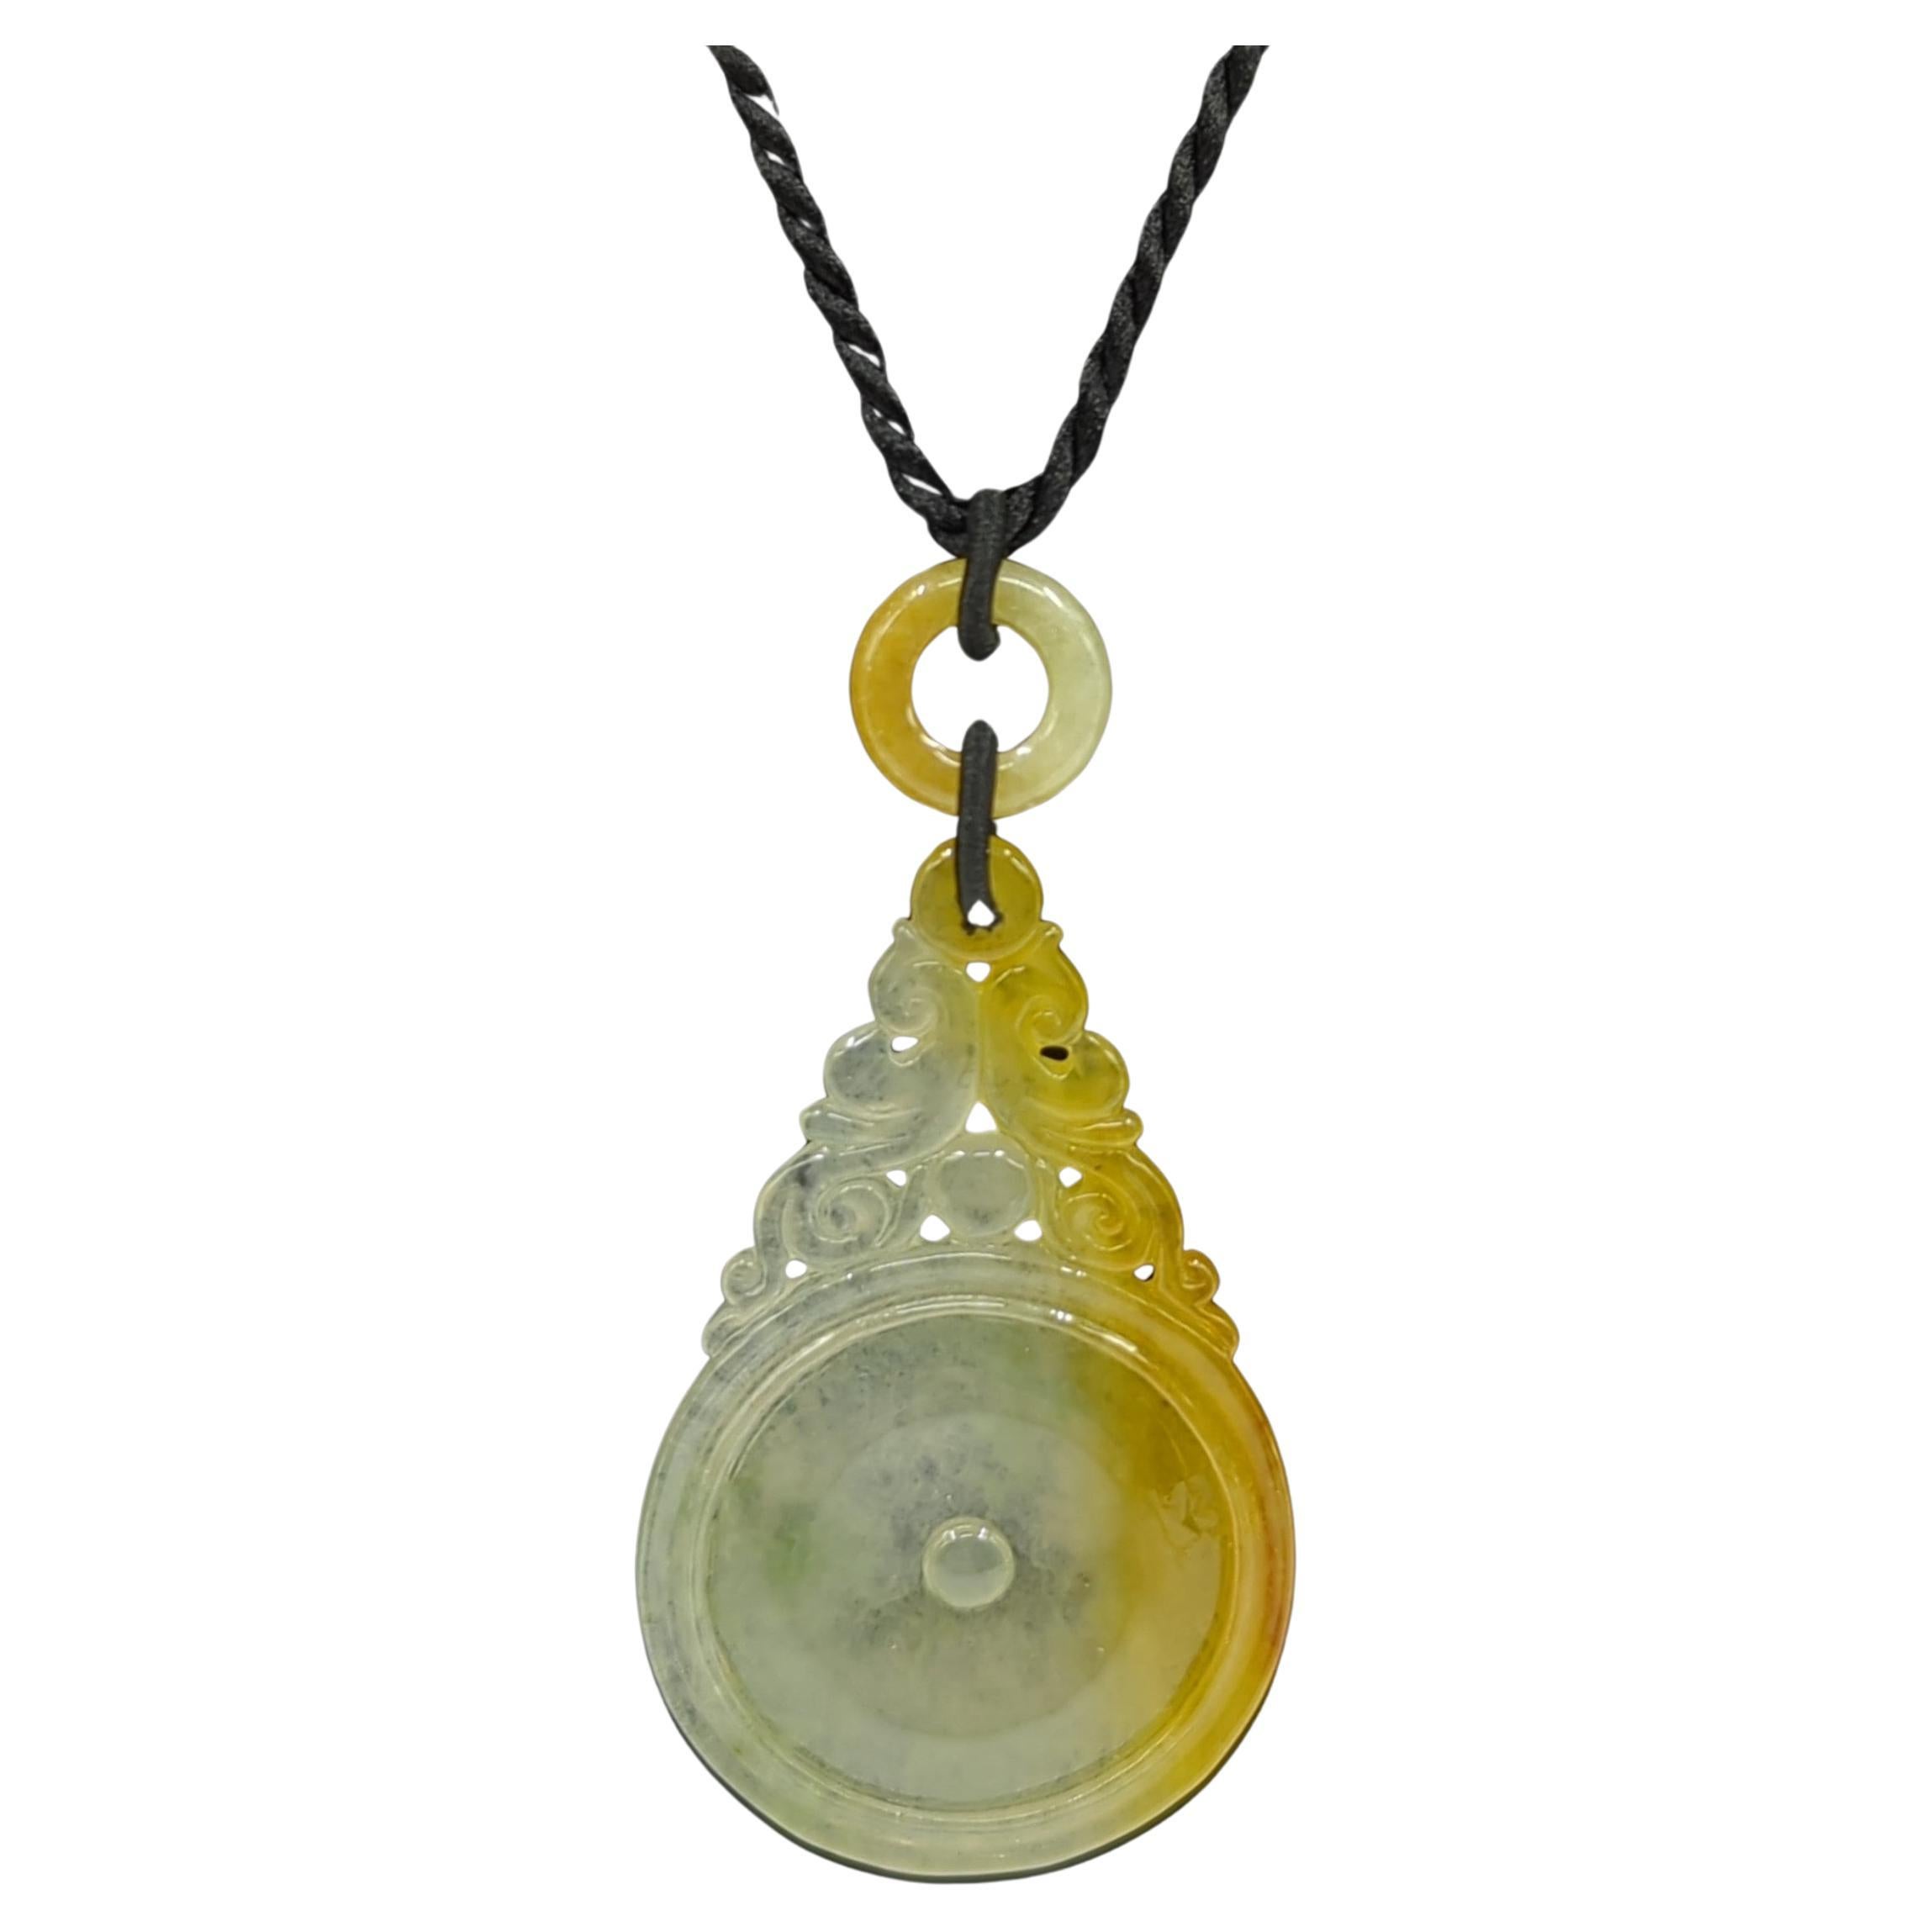 A  finely carved and pierced natural honey yellow jadeite pendant with light moss green inclusions, featuring a circular bi disc medallion, topped with scrolling foliage and linked to a circular yellow jadeite bead

This fine jadeite necklace makes